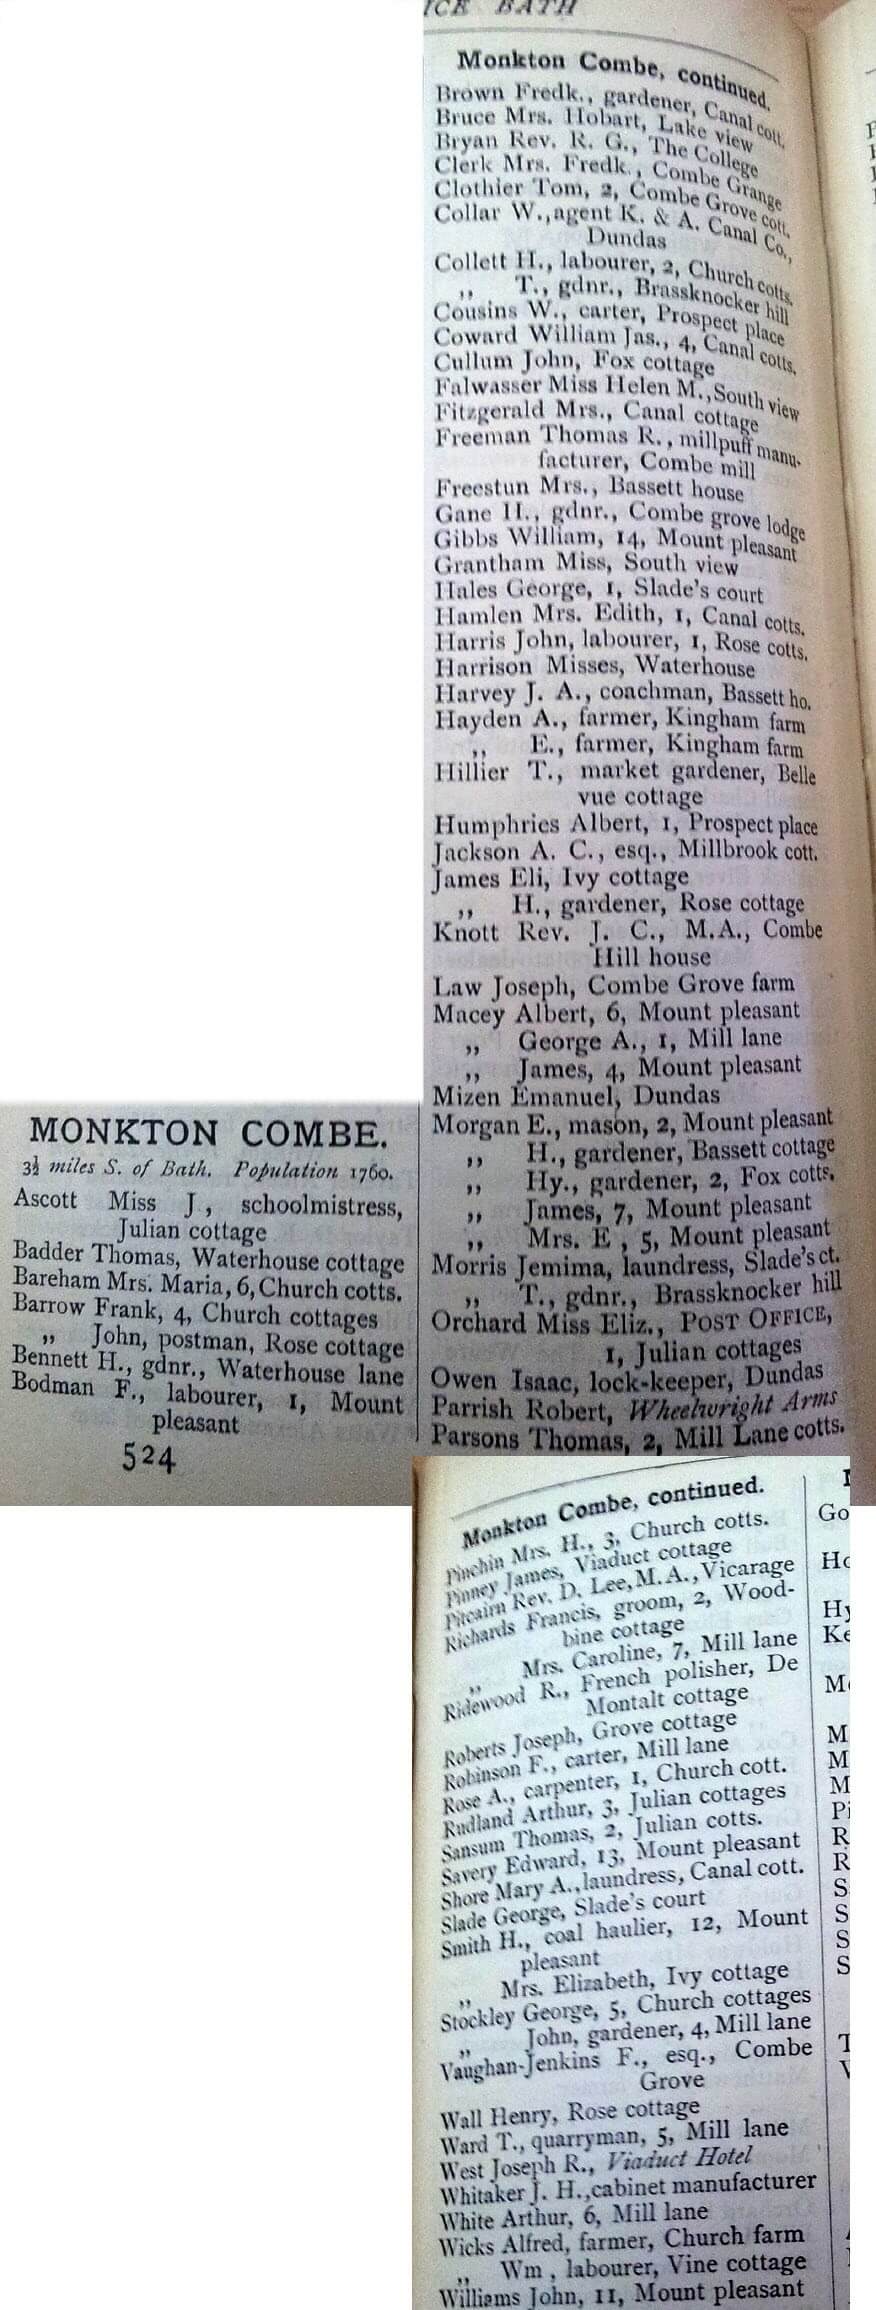 1892 Post Office Directory for Monkton Combe